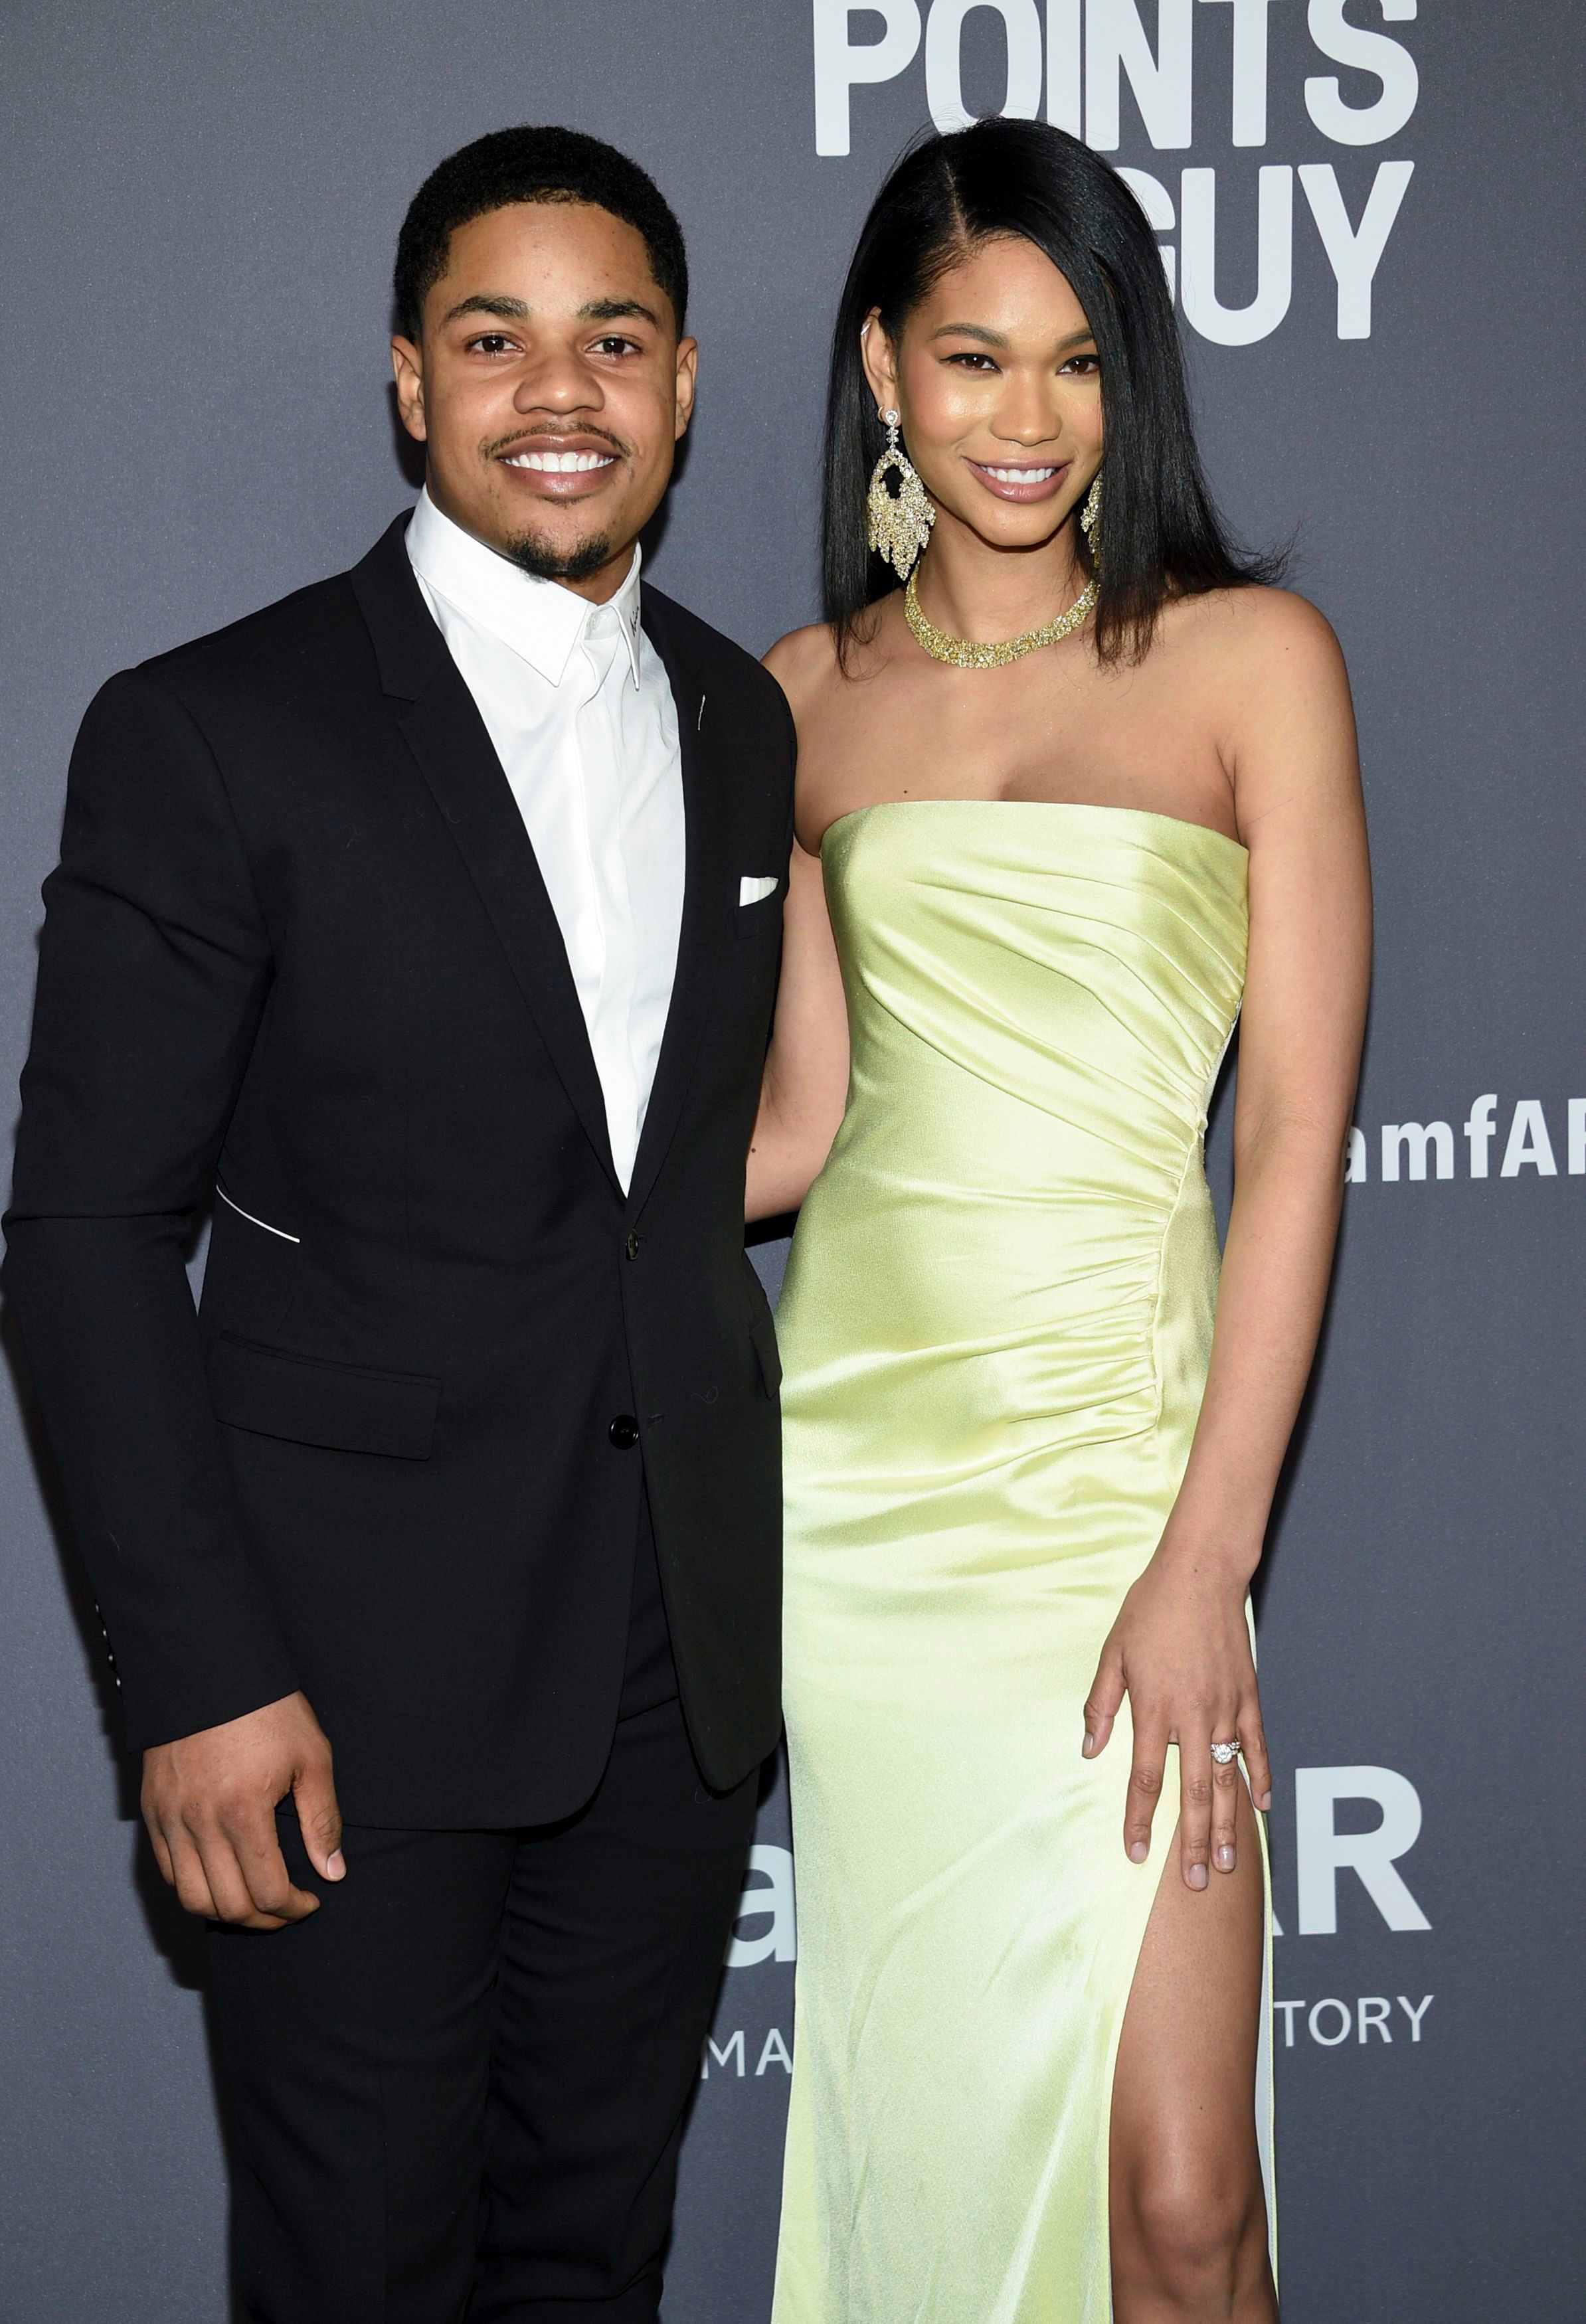 <p>NFL star Sterling Shepard met model wife Chanel Iman at football star Victor Cruz's 30th birthday party in 2016. "When I was younger, I'd see her in the Victoria's Secret magazines that my sisters were getting, but it didn't really come to me [when I saw her at the party]," he told Haute Living magazine in 2019. "When she walked into the room one of my boys was like, 'You know who that is?' and I was like, 'No.' I approached her and asked her if she wanted a drink, and we were just talking for the rest of the party, and then we went to some club for the afterparty and kept talking. I got her number, and we went our own separate ways, but we stayed in contact. It was kind of crazy." The couple have been married since 2018.</p>